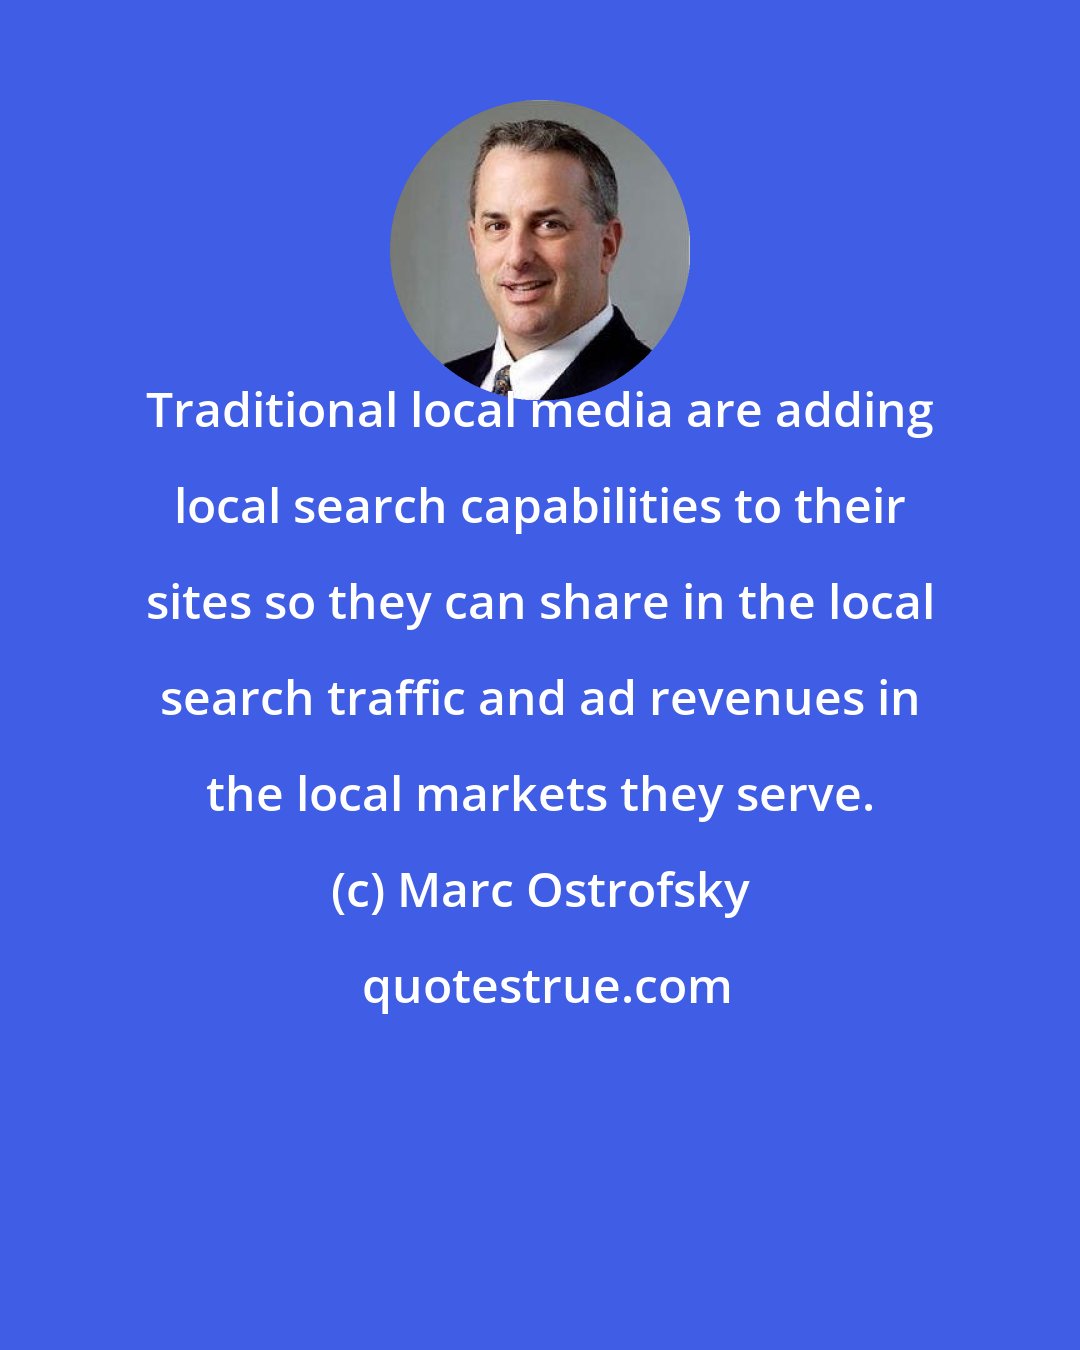 Marc Ostrofsky: Traditional local media are adding local search capabilities to their sites so they can share in the local search traffic and ad revenues in the local markets they serve.